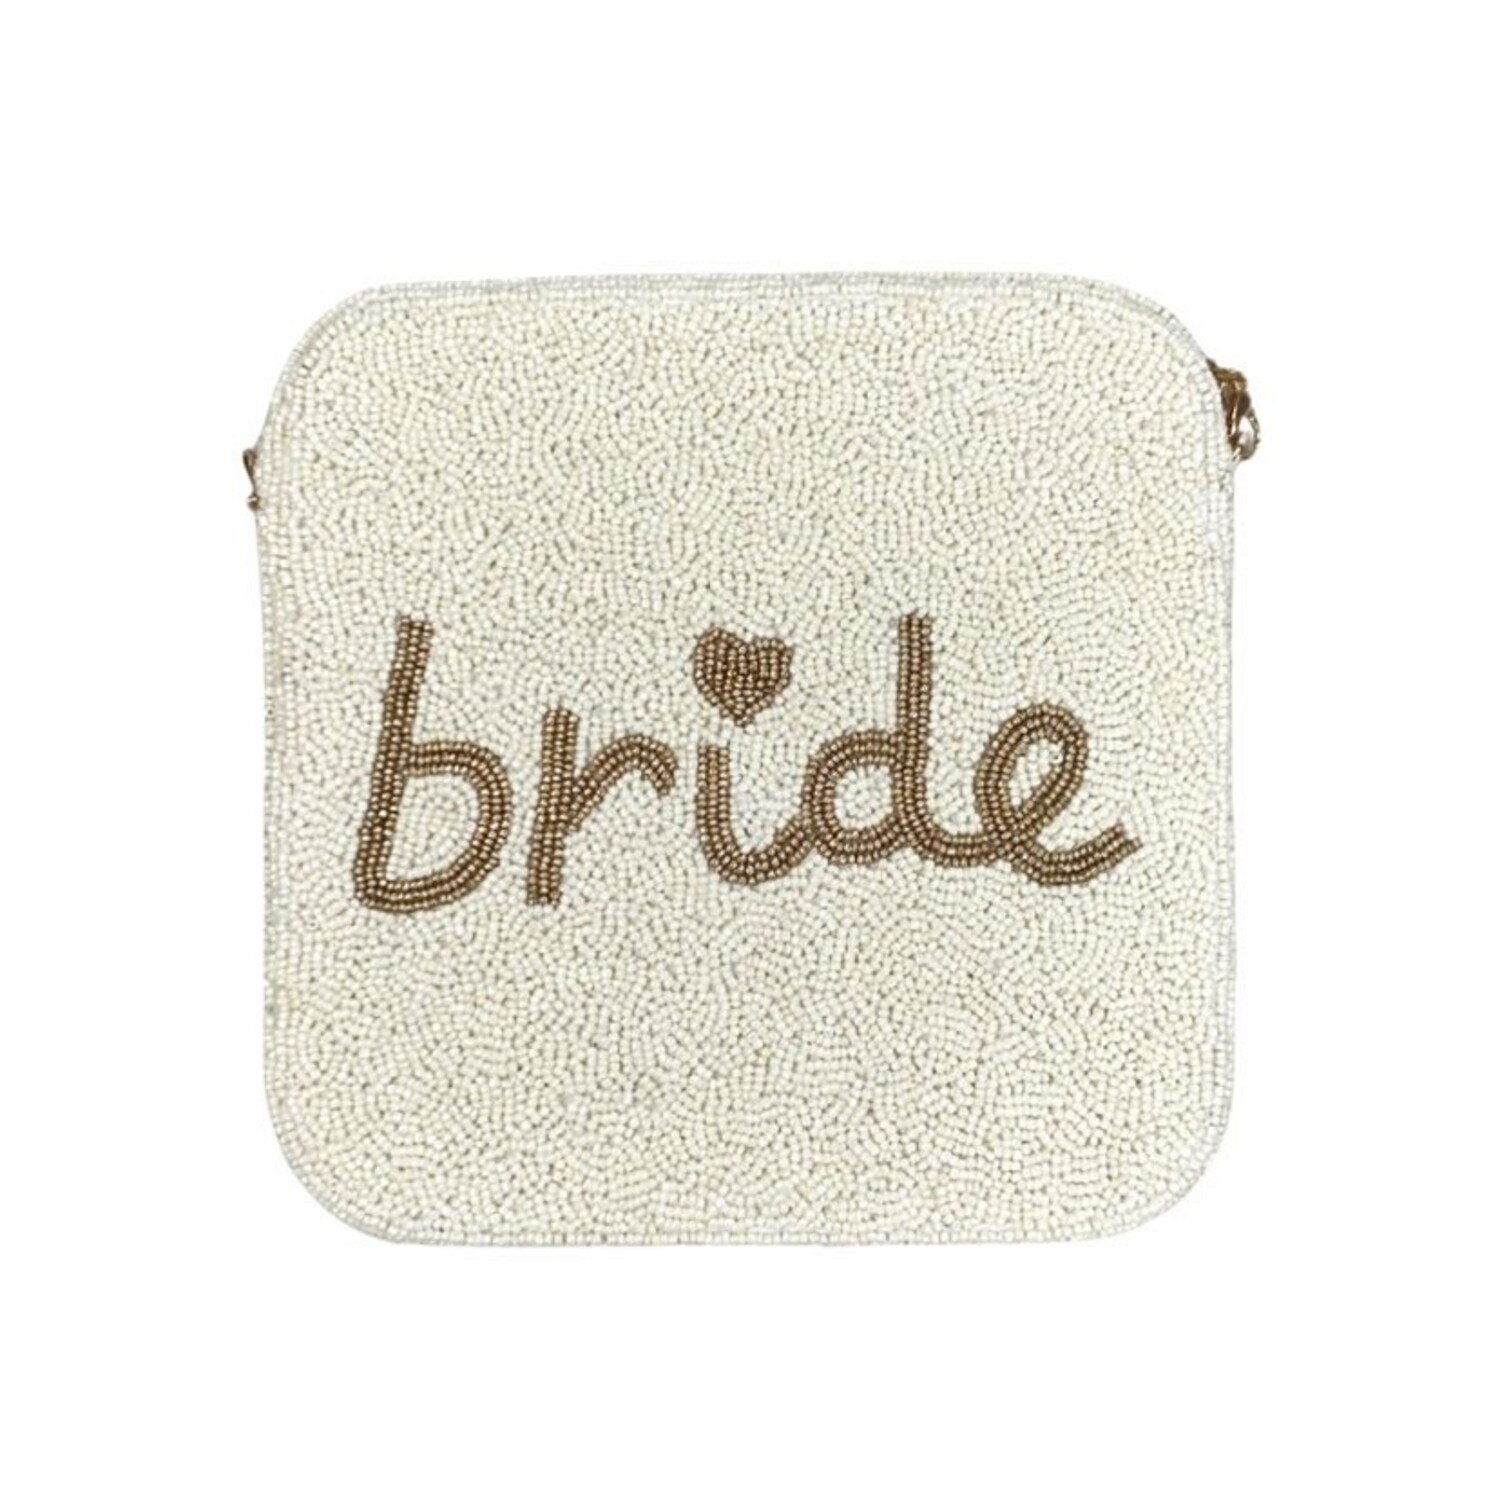 Bridal White And Gold Beaded Clutch - Handbags